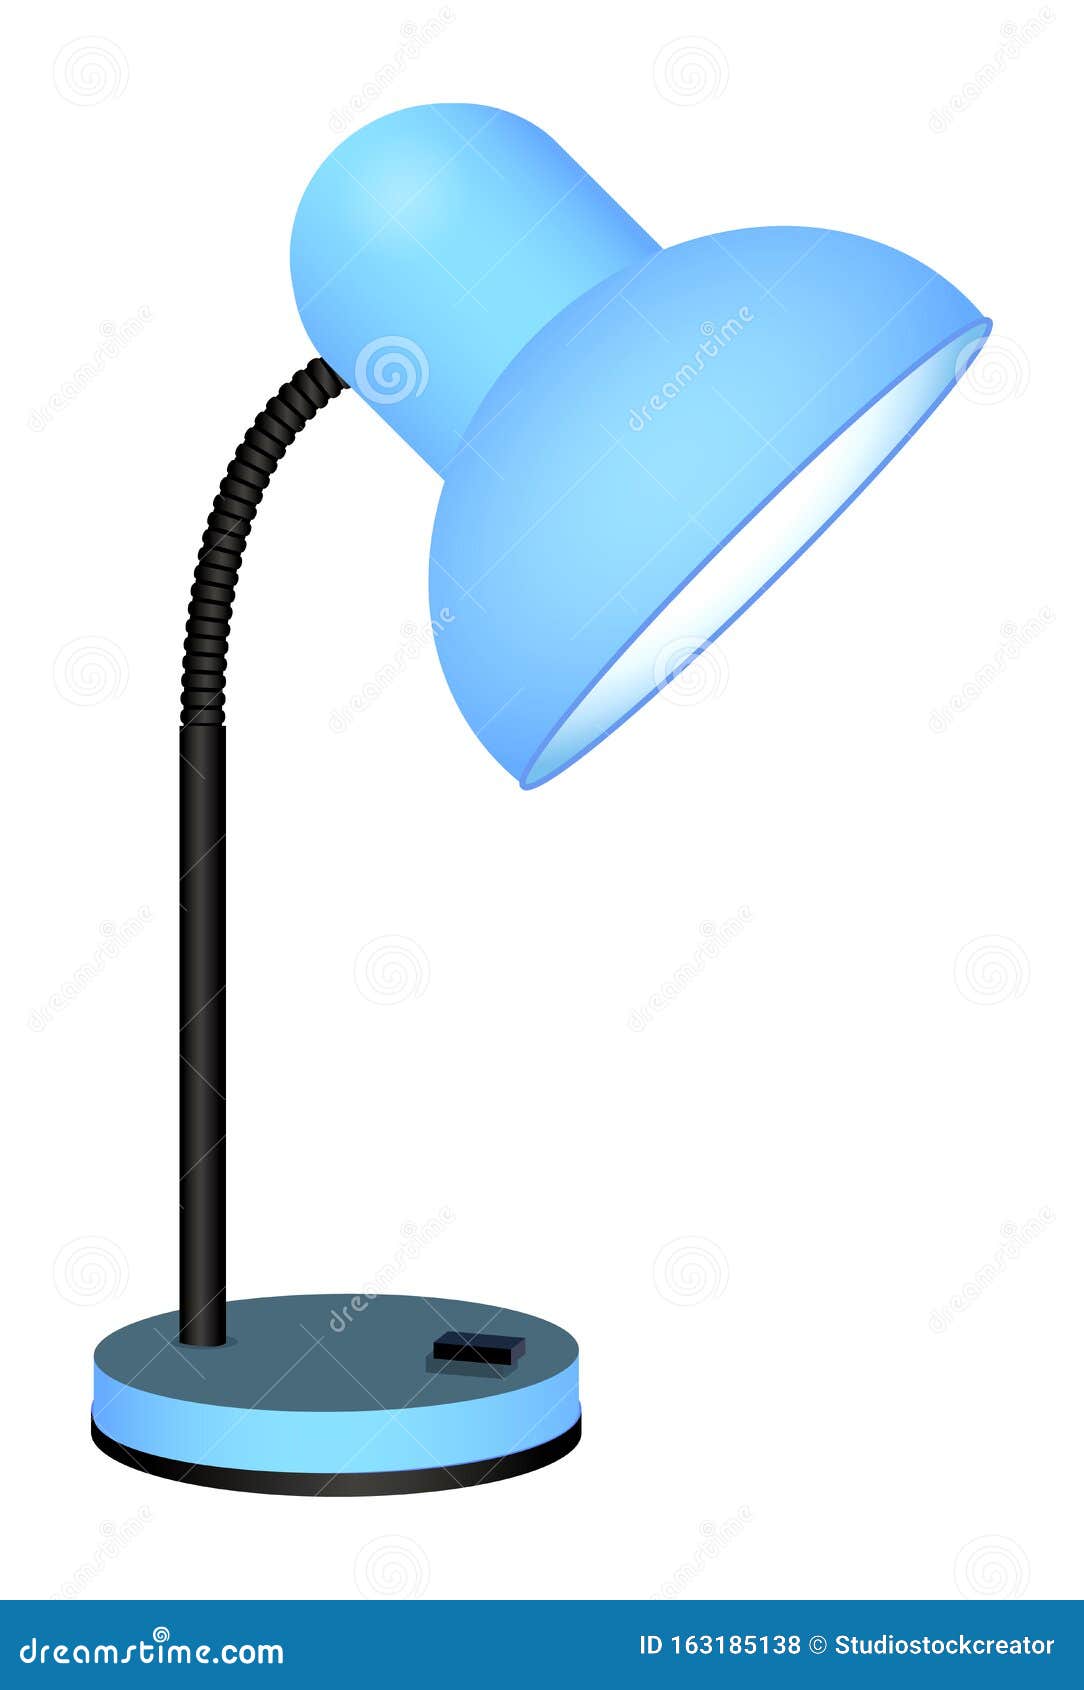 Cute Cartoon Desk Lamp Isolated On A White Background Vector